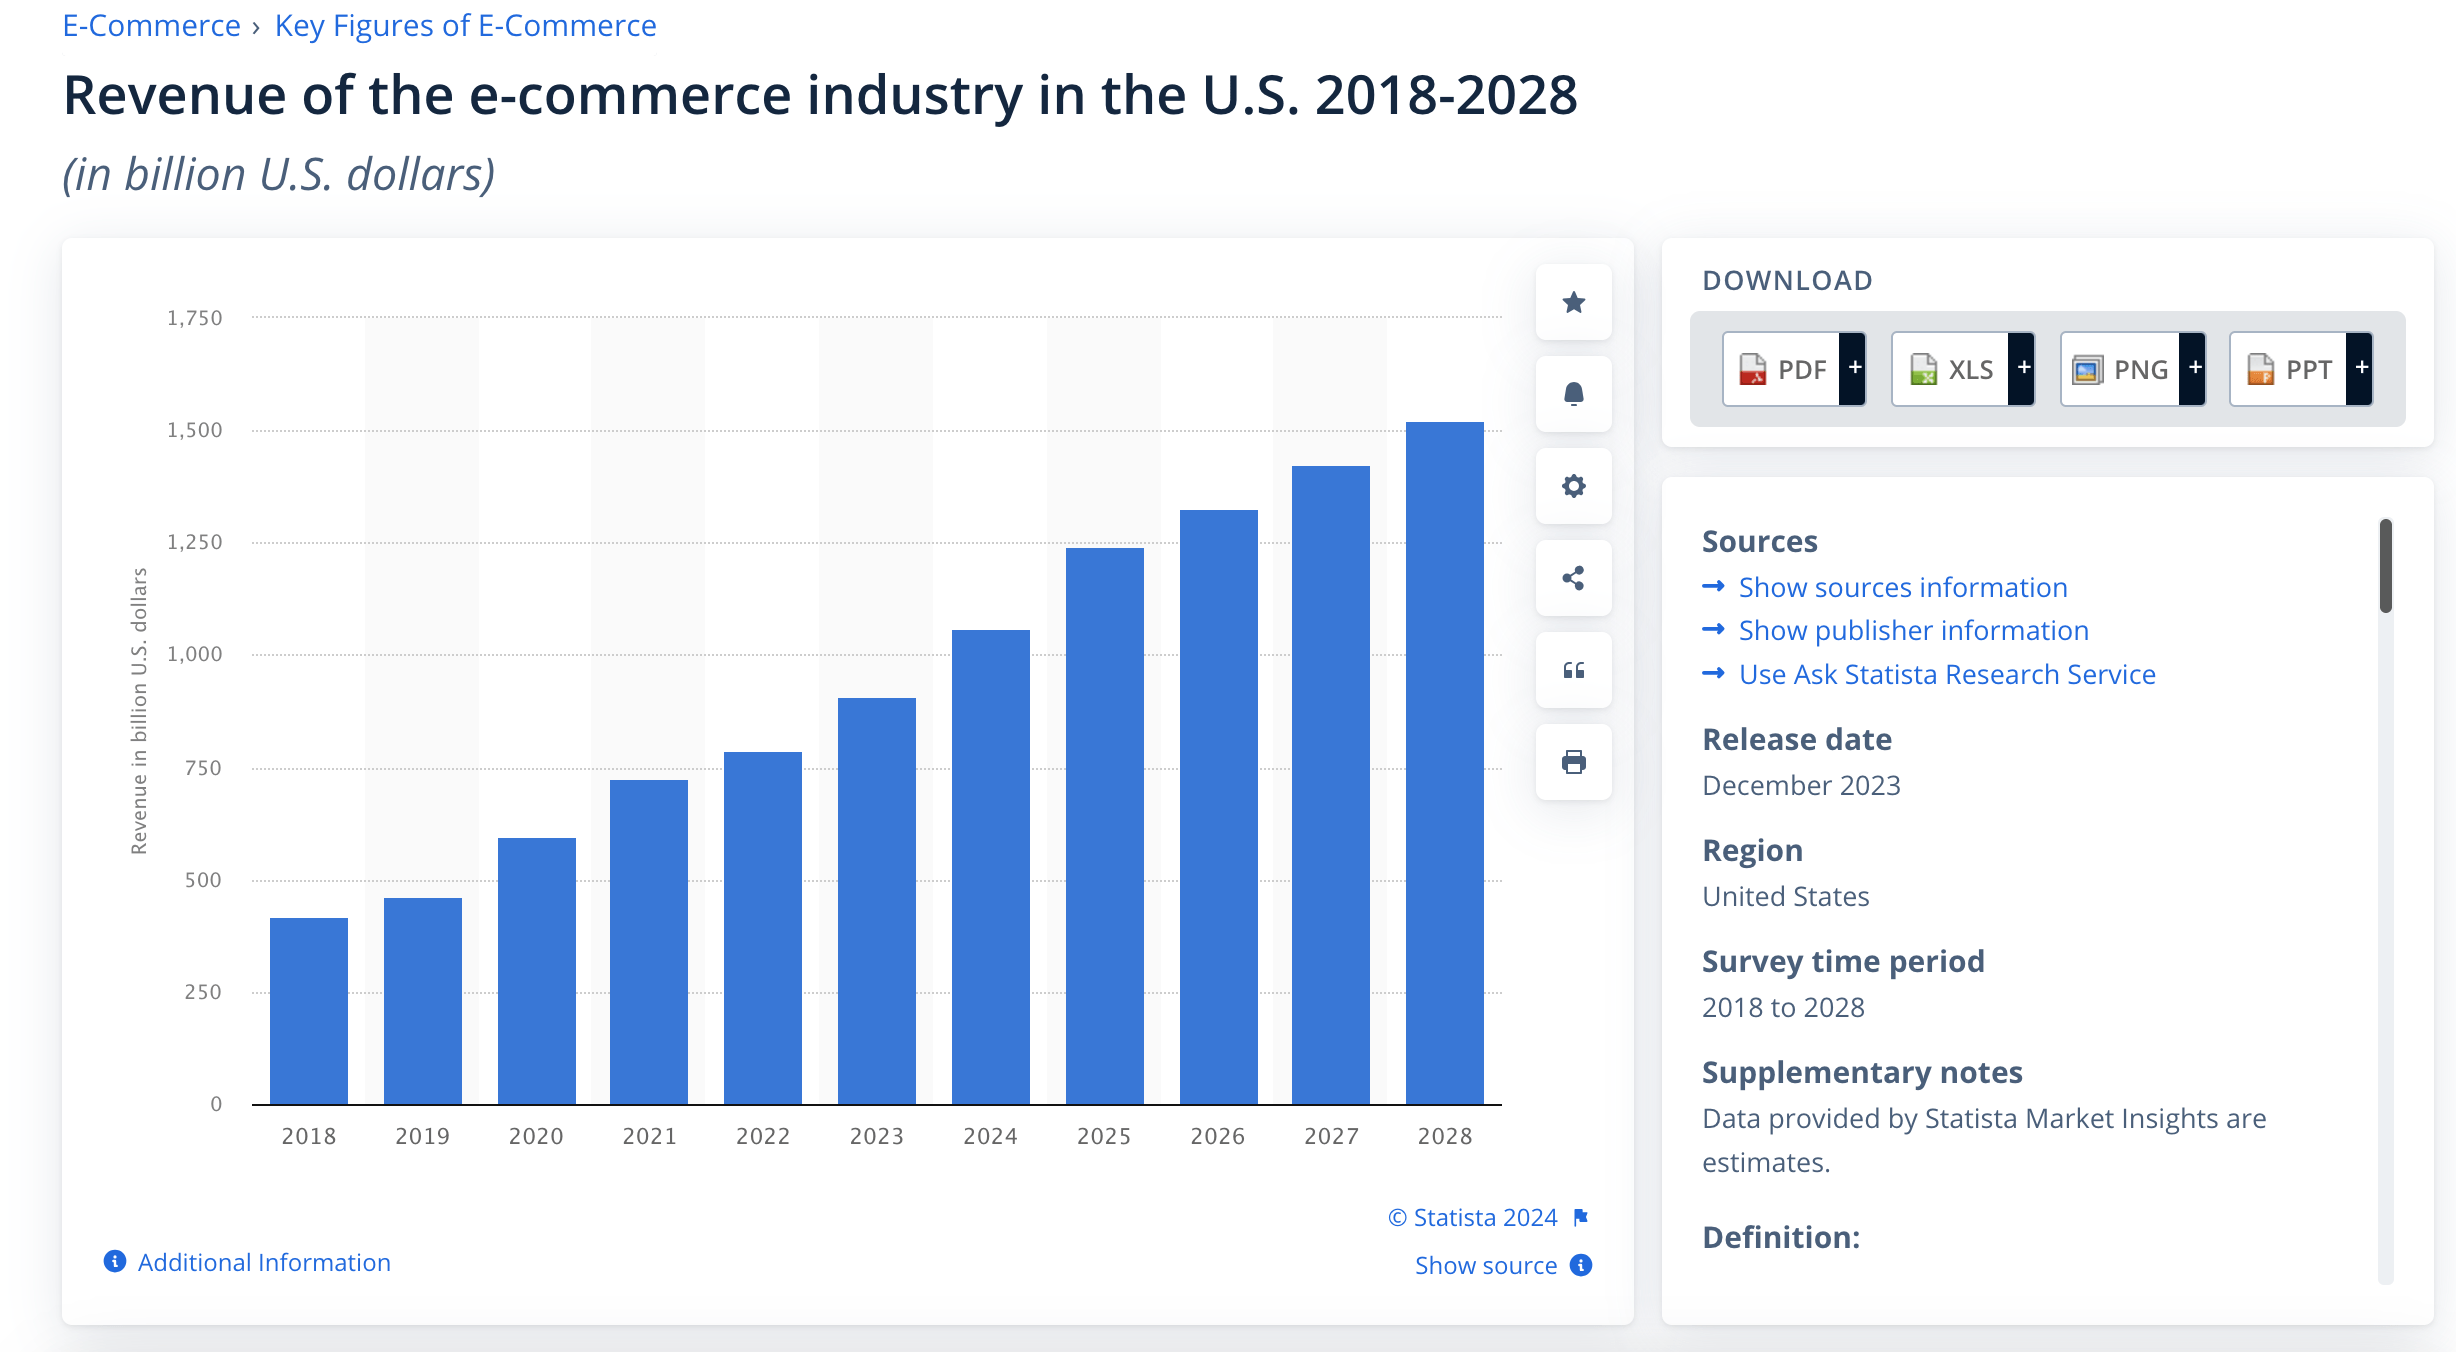 Revenue of the e-commerce industry in the US 2018-2028 -  